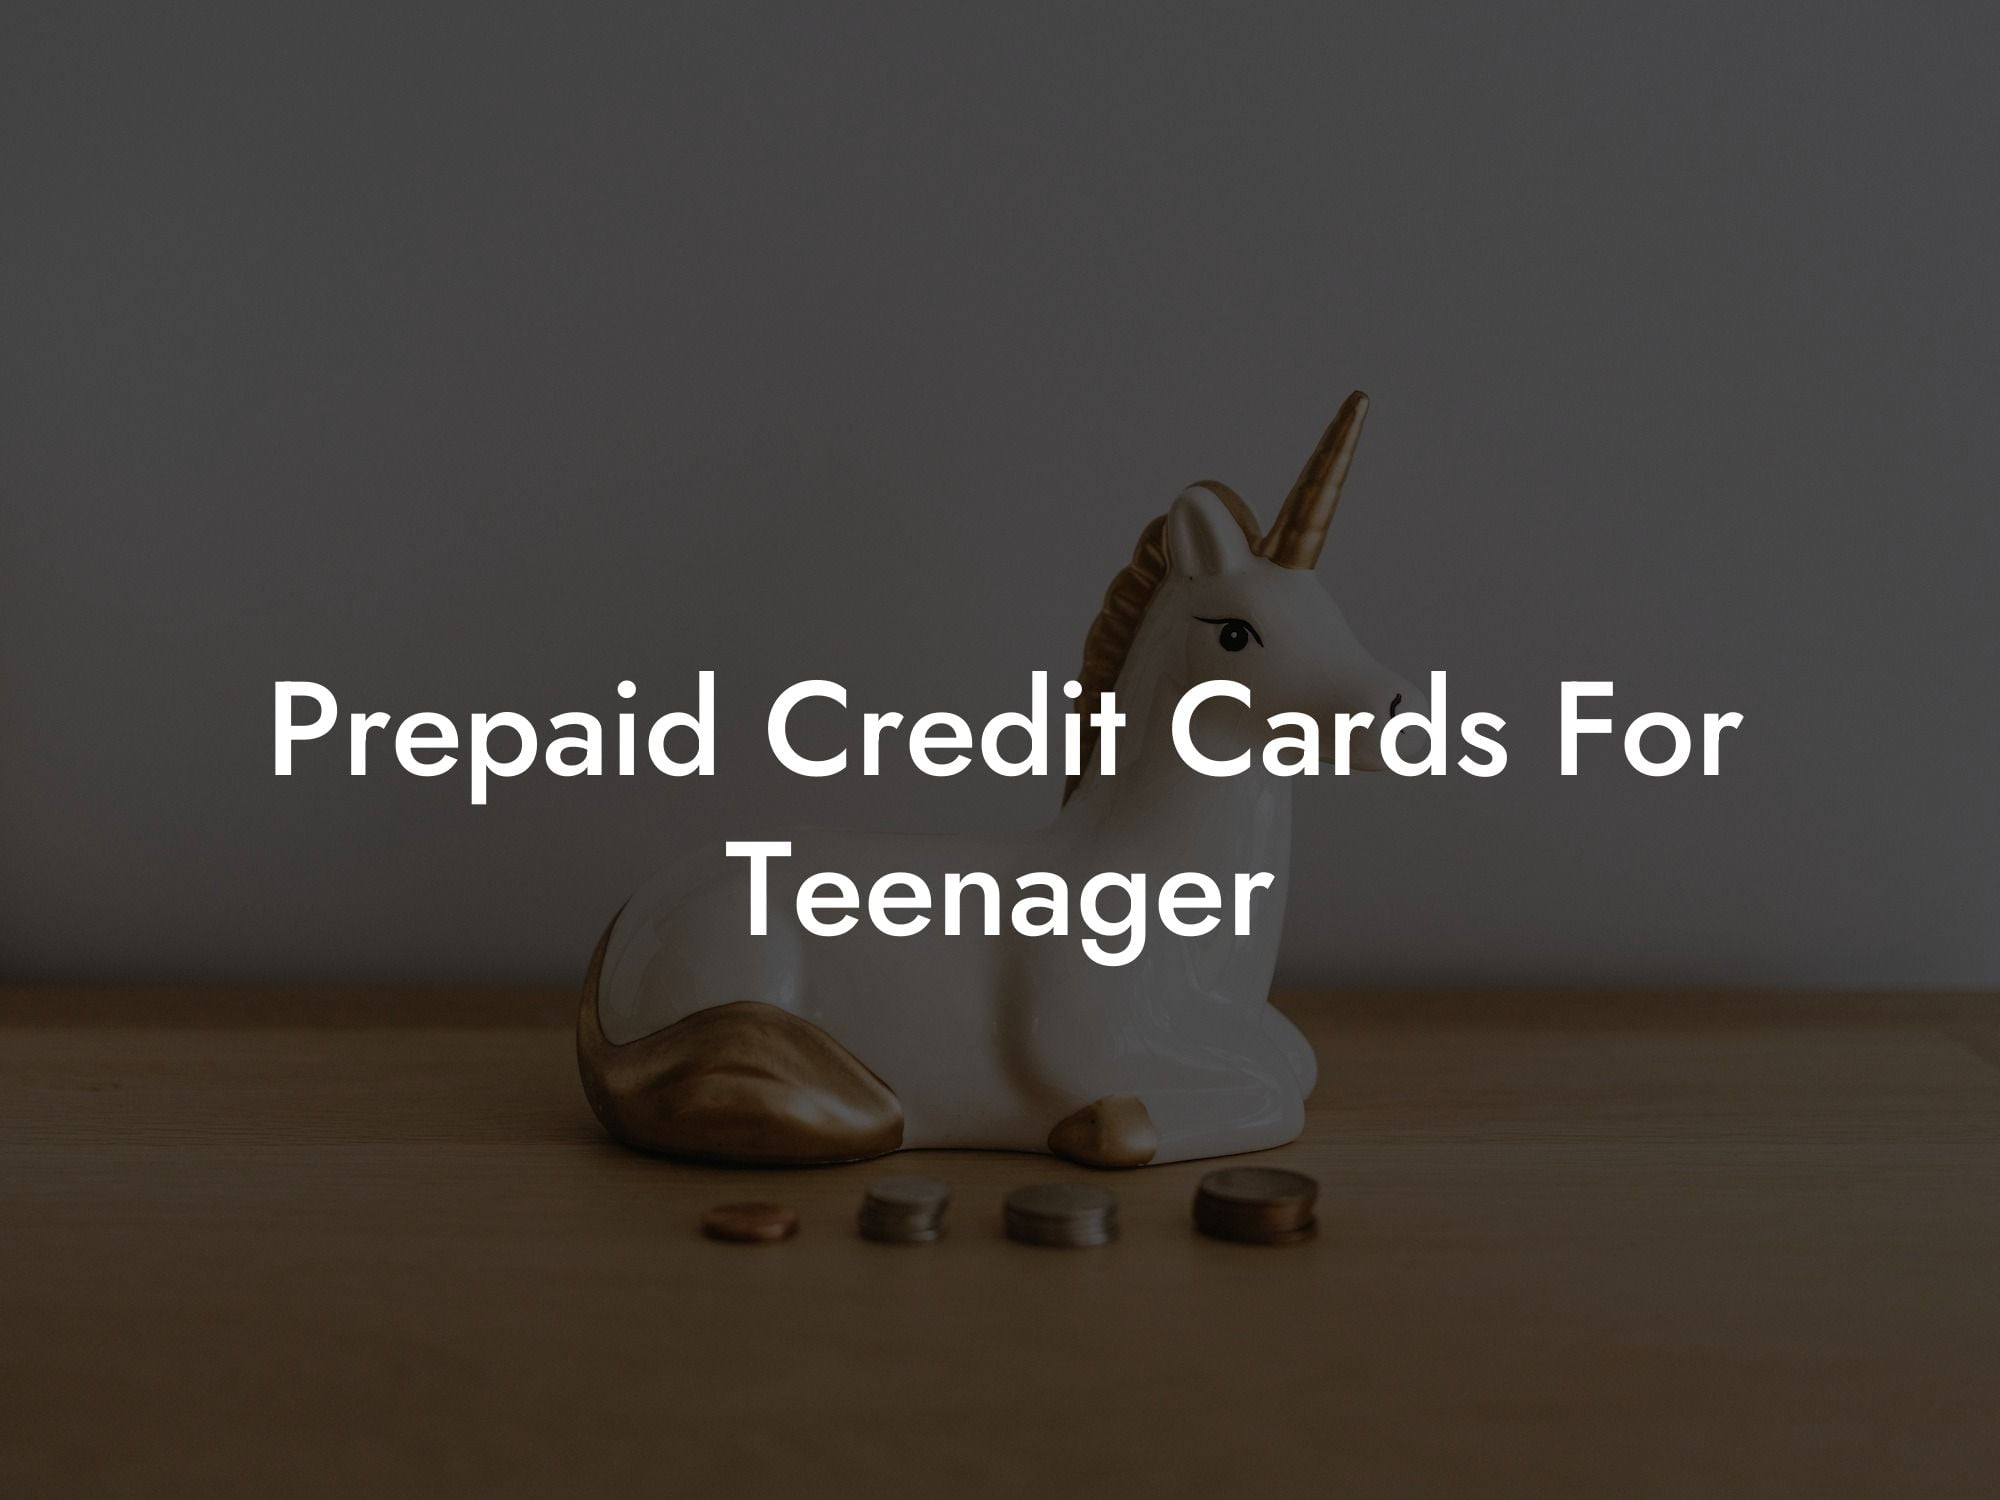 Prepaid Credit Cards For Teenager